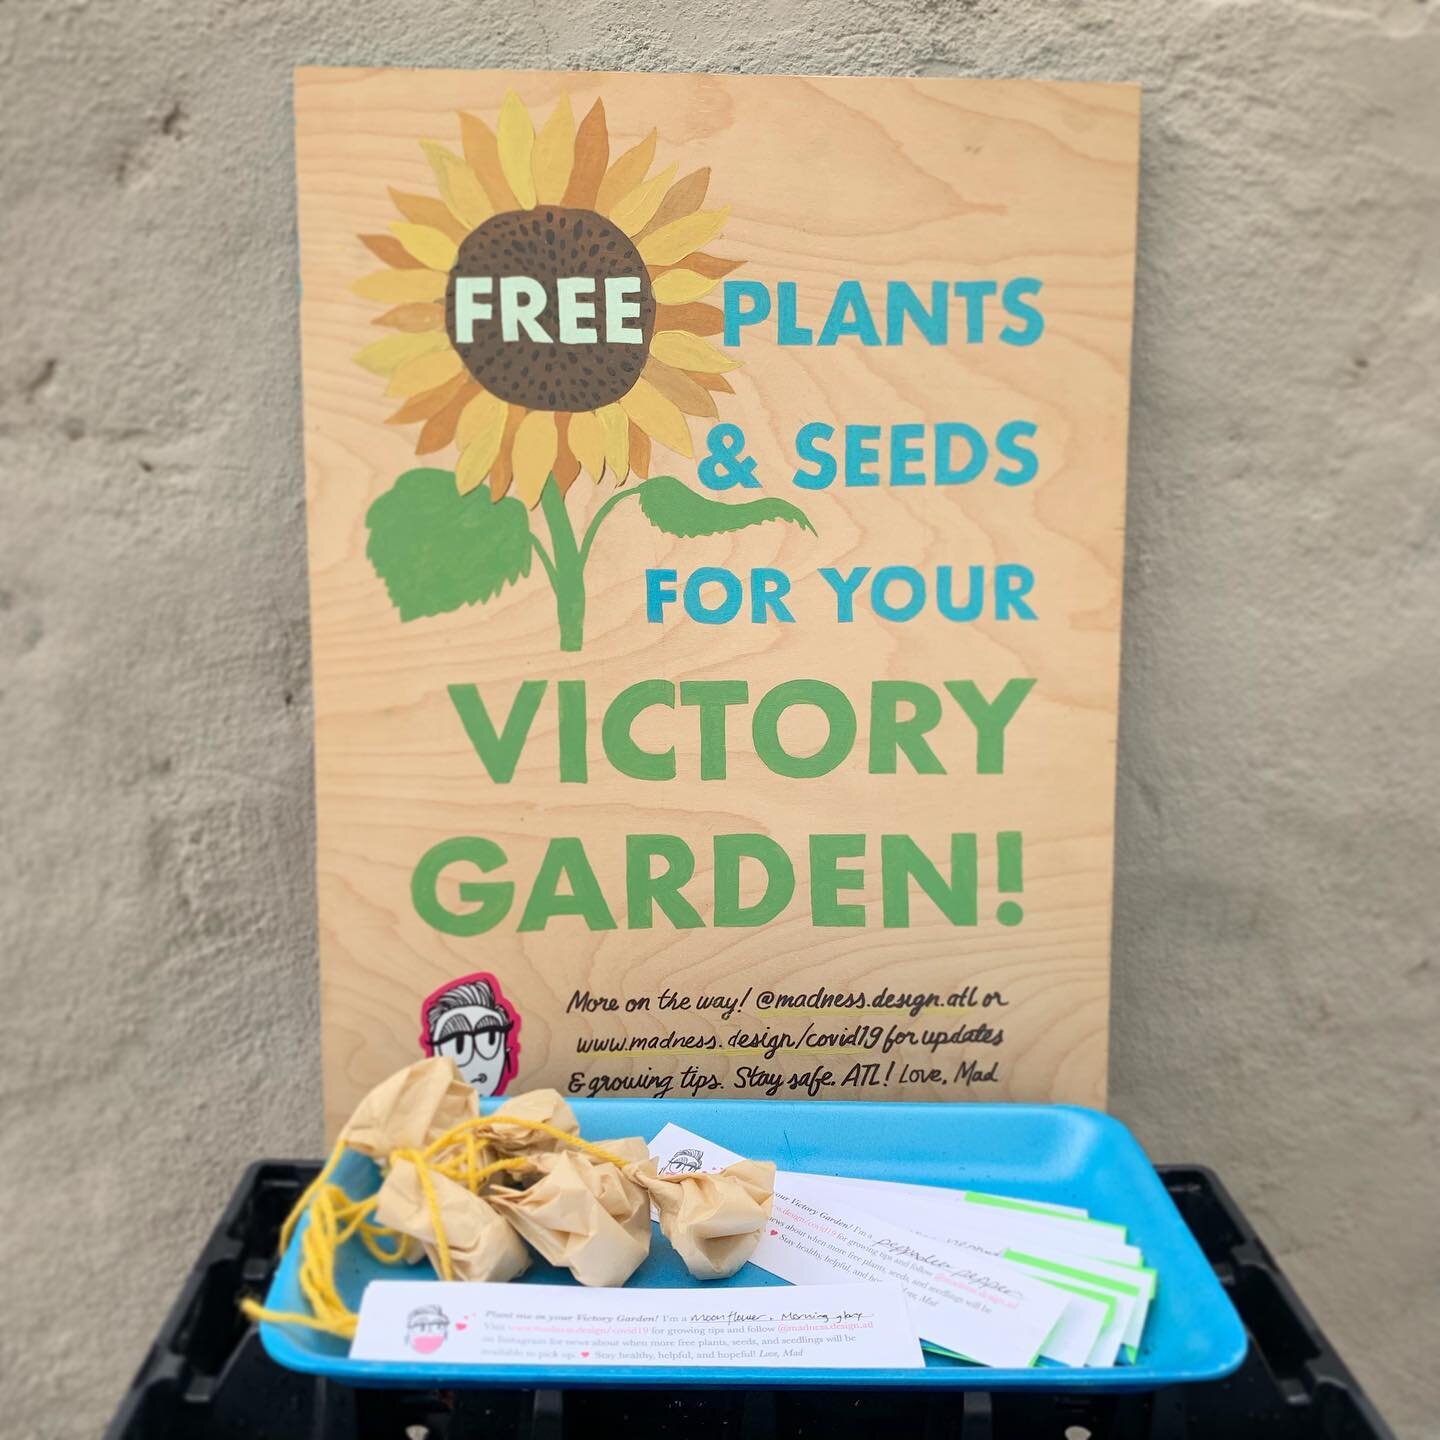 🌧🌱⛅️ April showers bring May flowers... and eventually, late-summer peppers! Seeds are outside now in the #oldfourthward and they&rsquo;re looking for a new home. 💚
.
.
.
If you come by, please take only one of each seed pack. To the left in the c